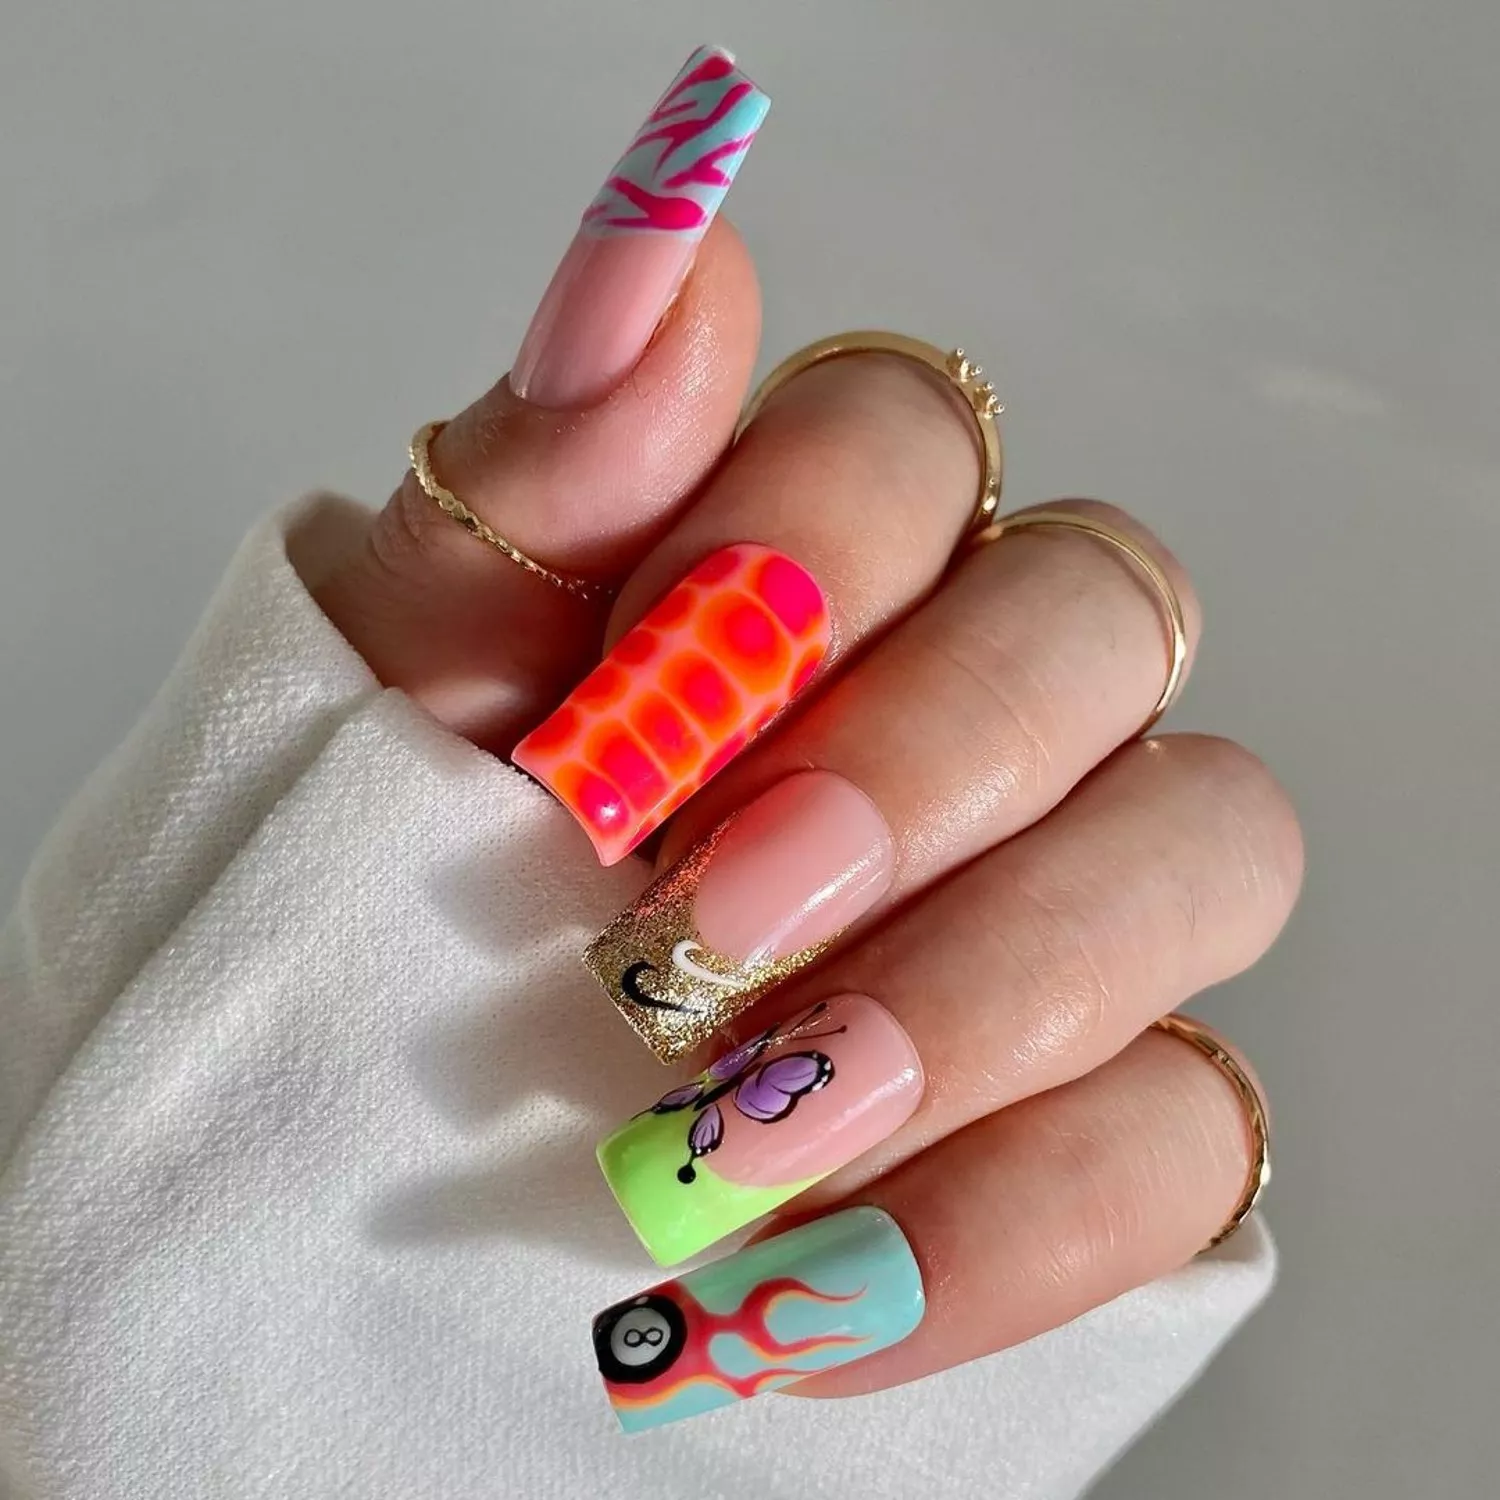 Mismatched manicure with flaming 8-ball, butterfly, glitter Nike, coral giraffe, and vivid zebra nails